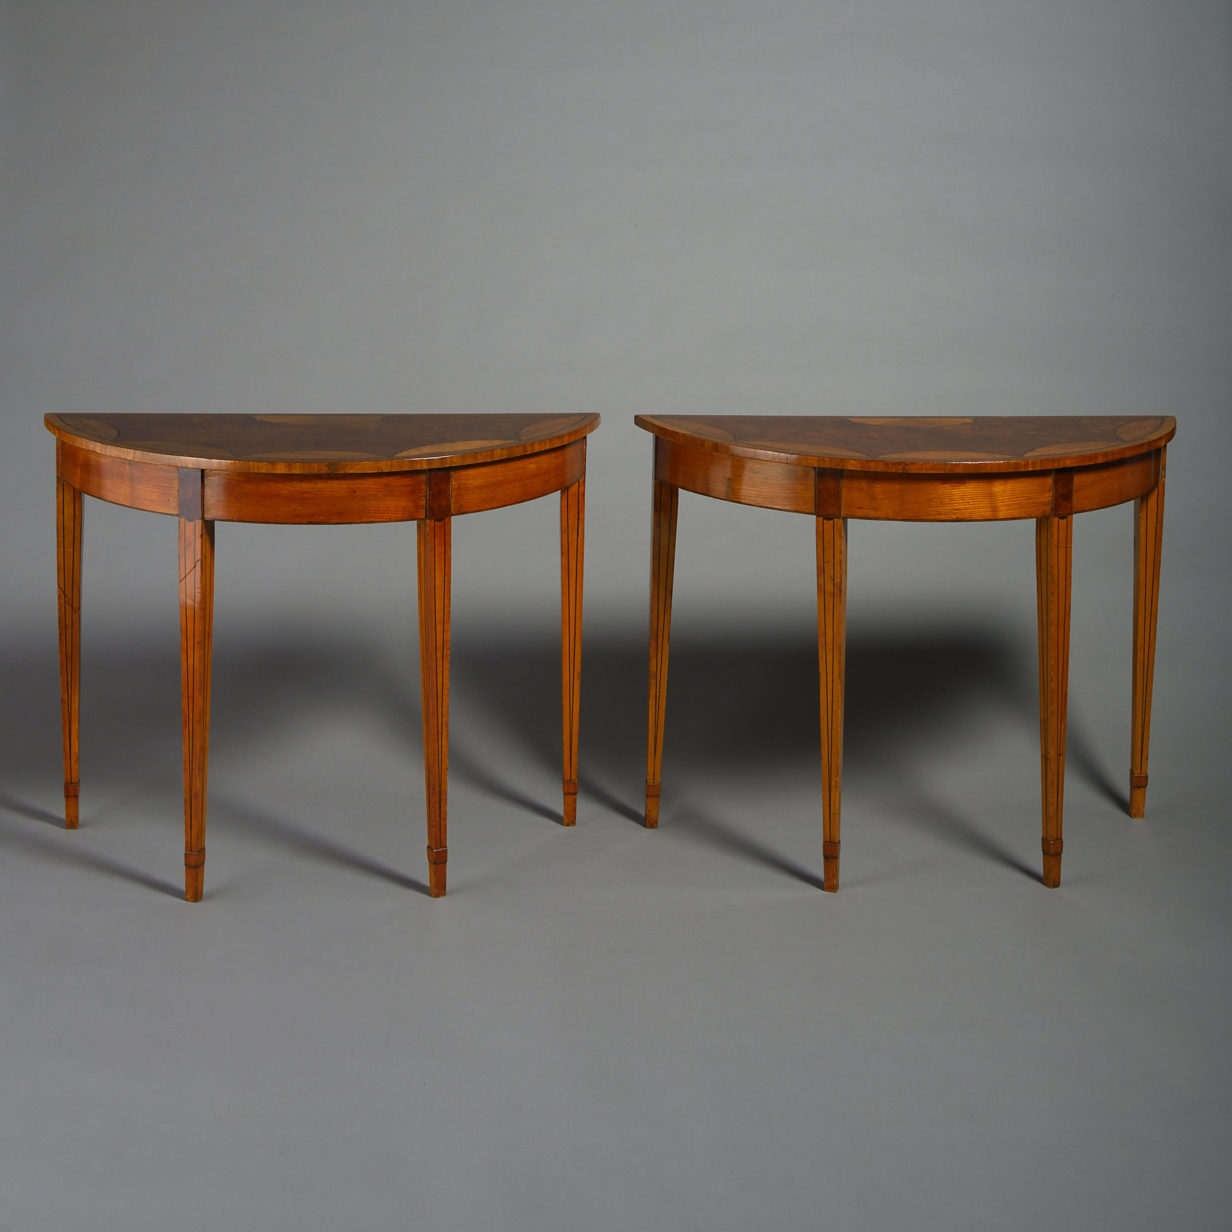 Pair of 19th century demi-lune console tables